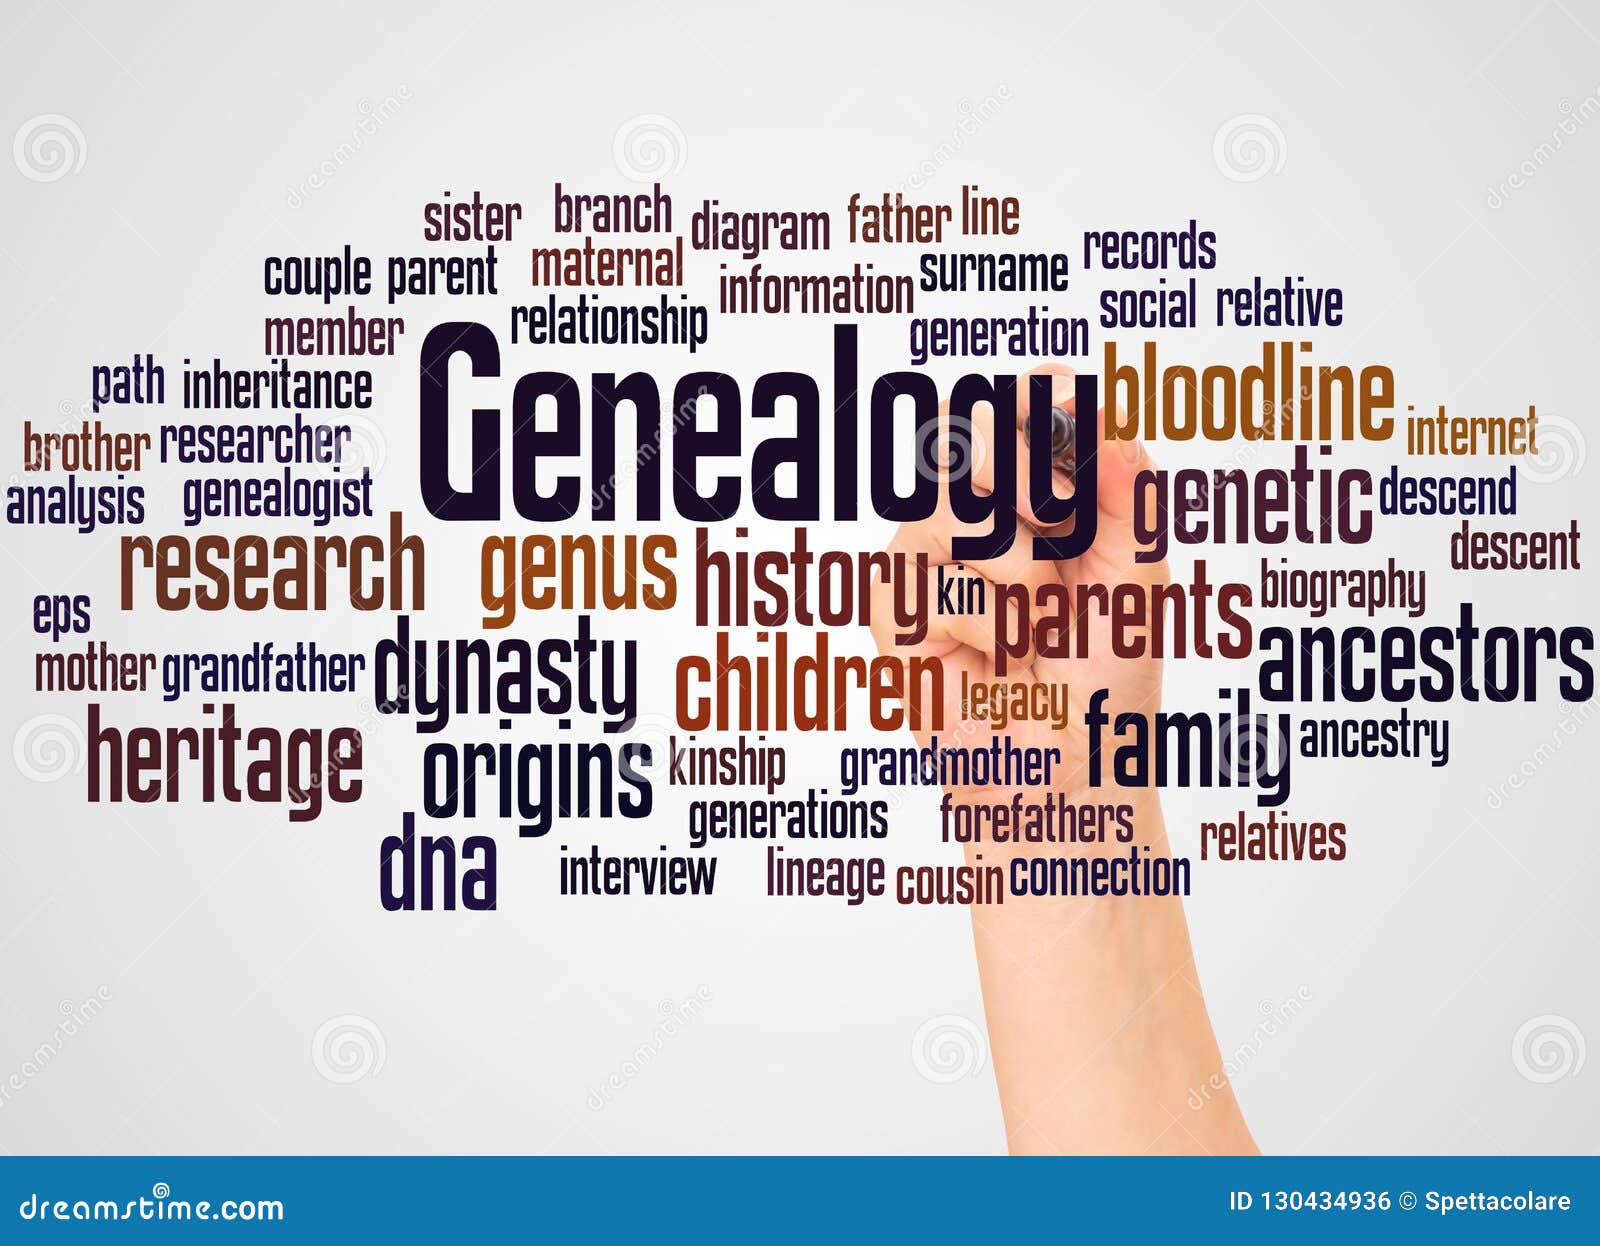 genealogy word cloud and hand with marker concept